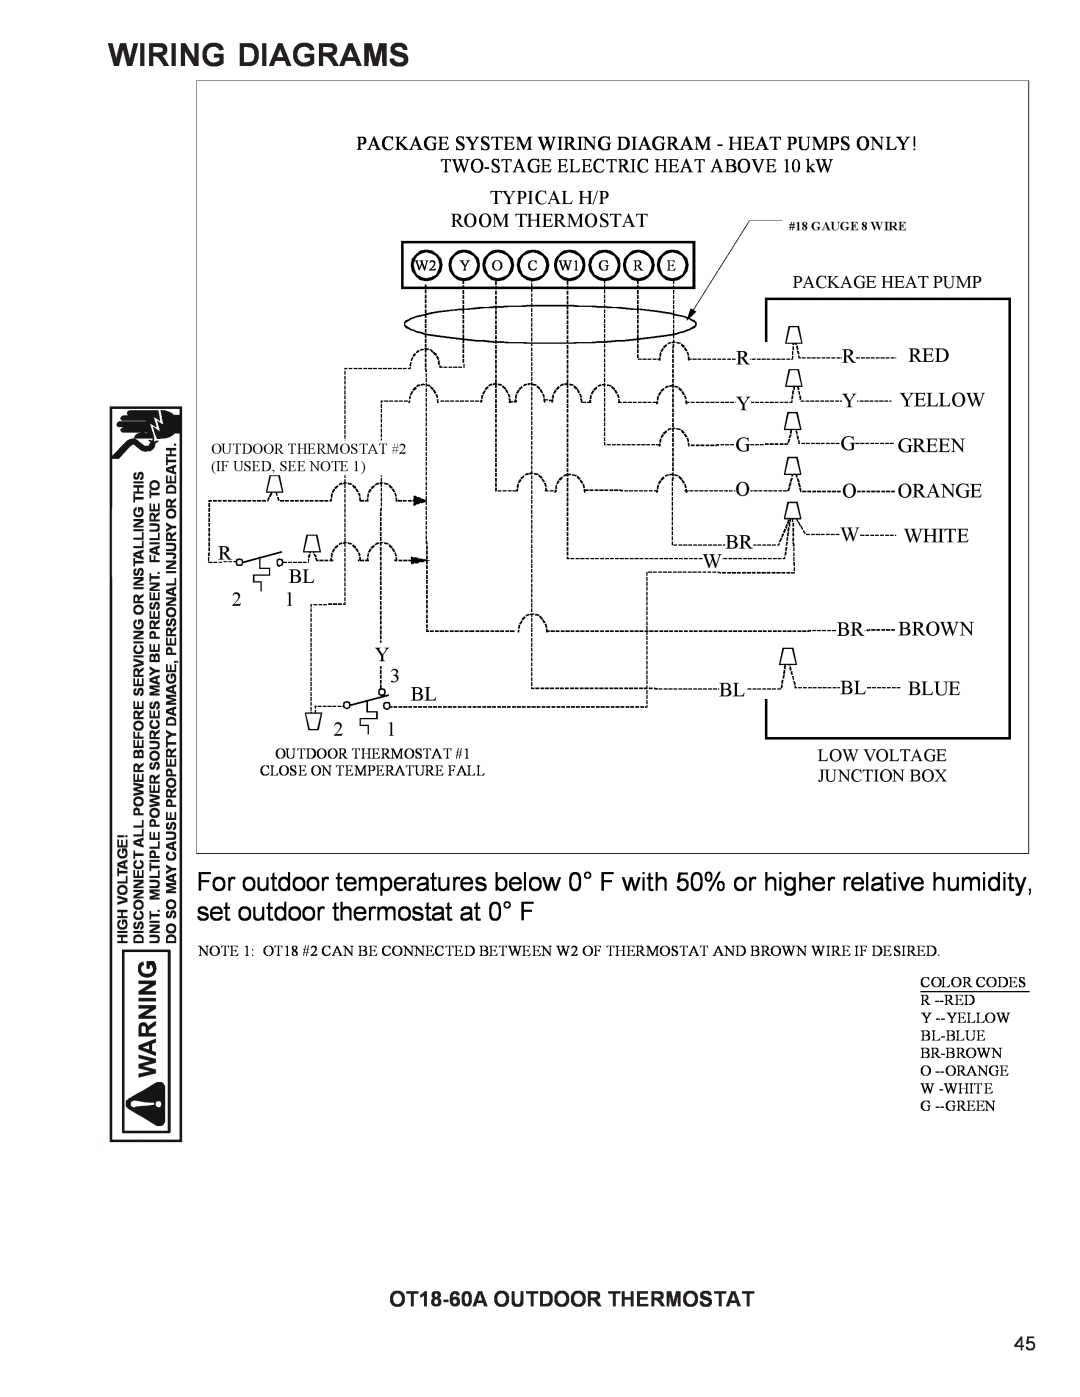 Goodman Mfg R-410A manual Wiring Diagrams, 3 BL, OT18-60AOUTDOOR THERMOSTAT, Room Thermostat 